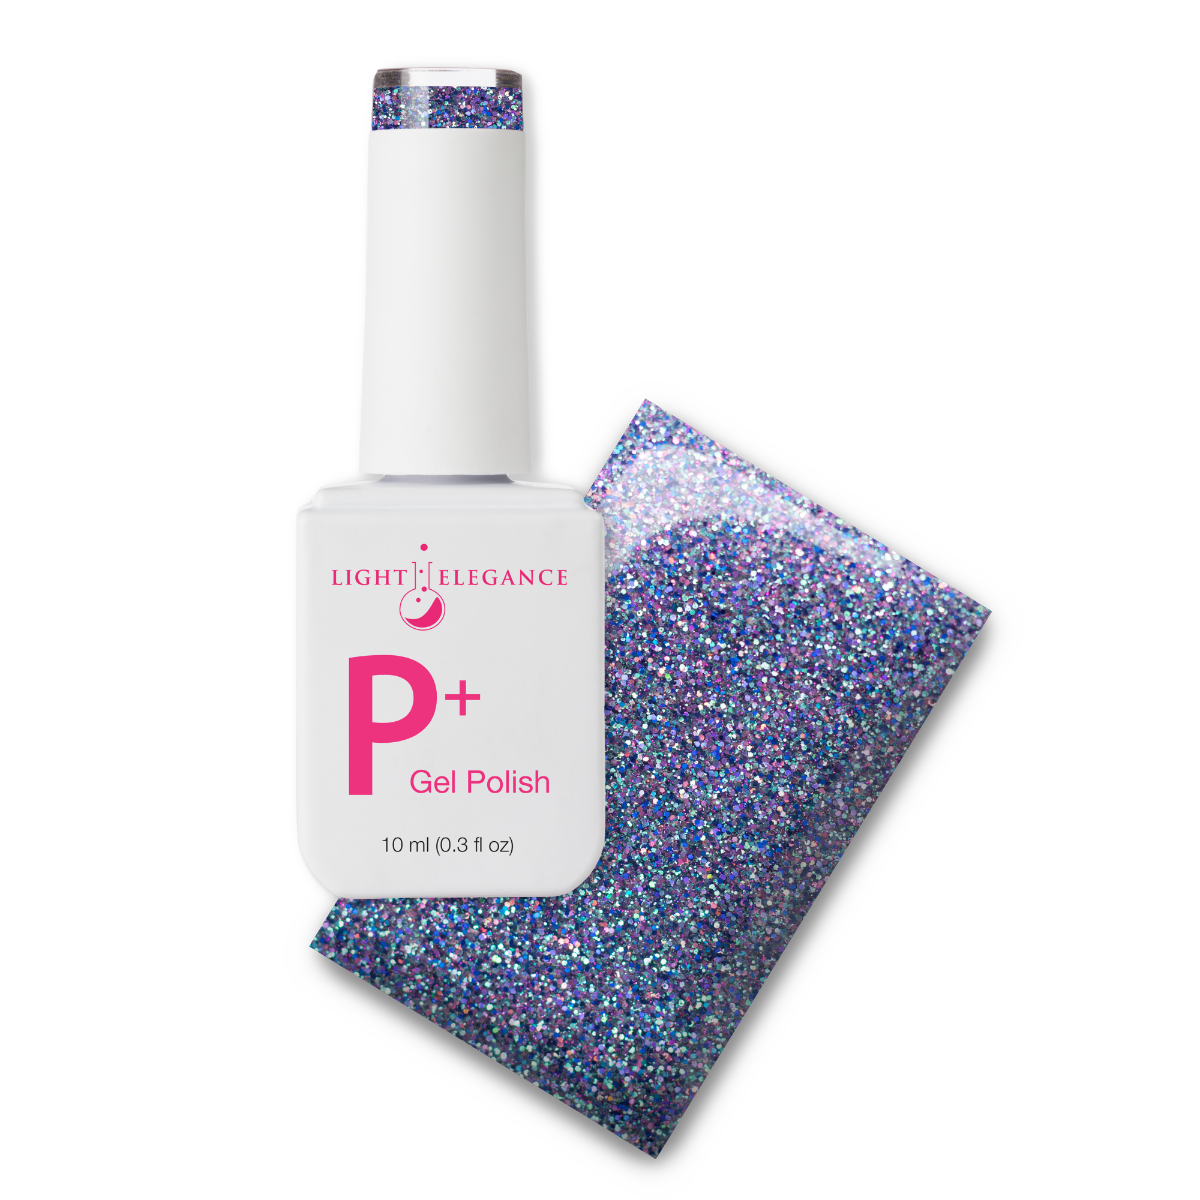 Light Elegance P+ Soak Off Glitter Gel - Tough Act to Follow :: New Packaging - Creata Beauty - Professional Beauty Products